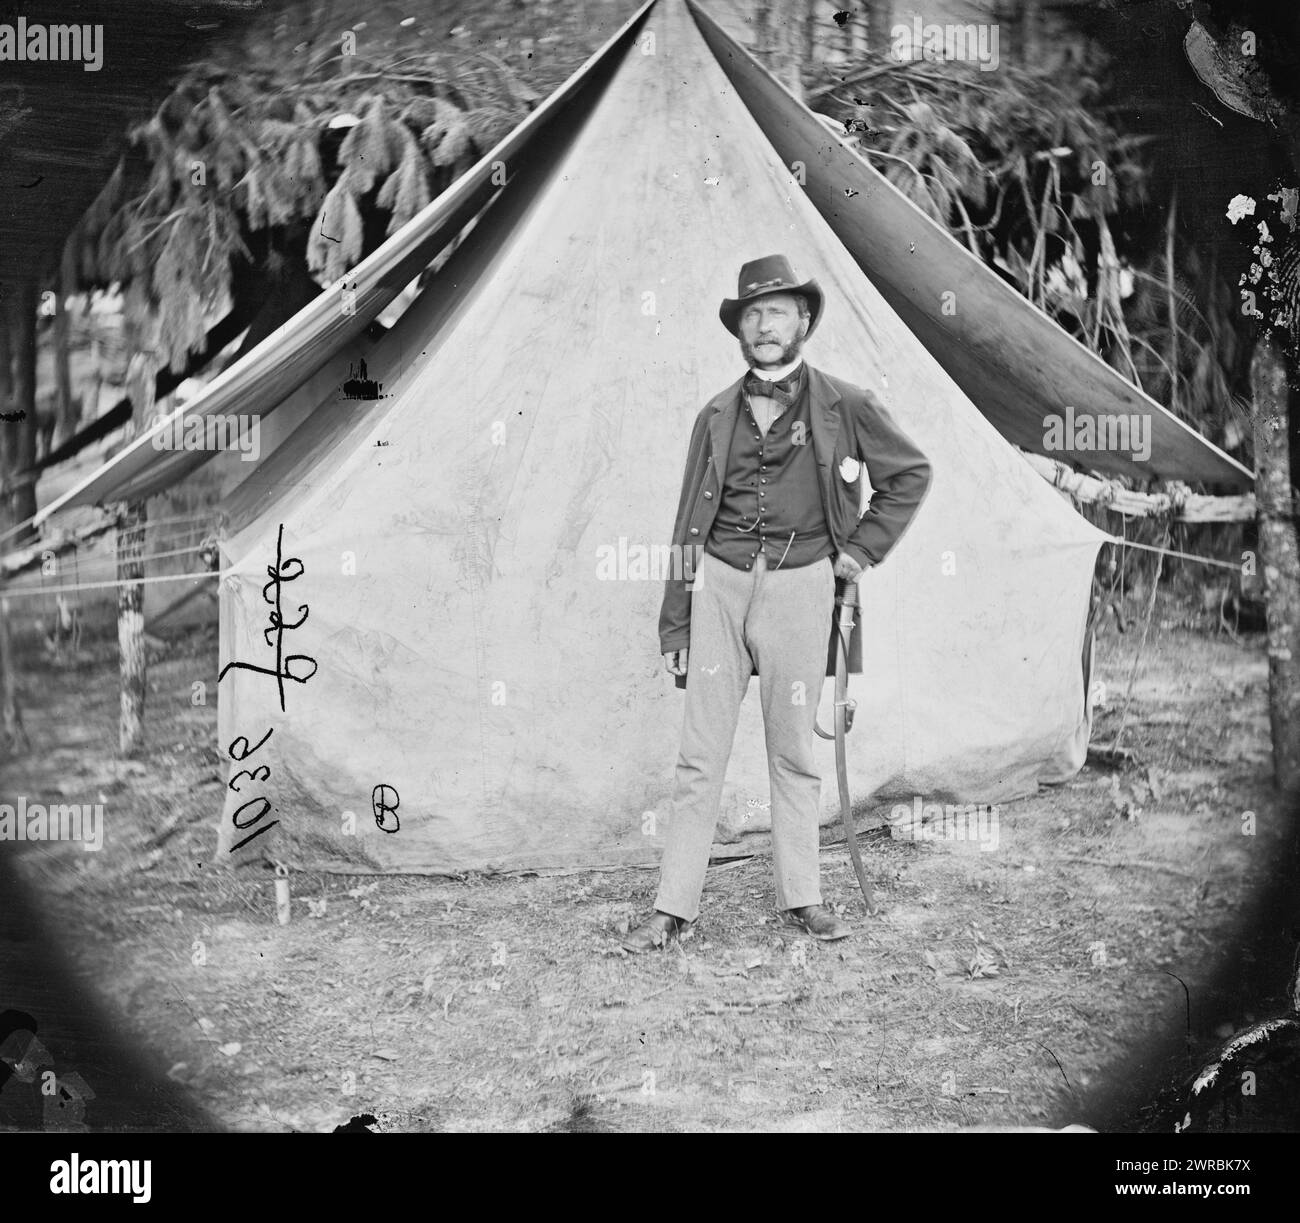 Col. Ernest M.P. Von Vegesack, 20th New York Infantry (Captain in Swedish army), between 1861 and 1869, United States, History, Civil War, 1861-1865, Glass negatives, 1860-1870, 1 negative: glass, wet collodion Stock Photo